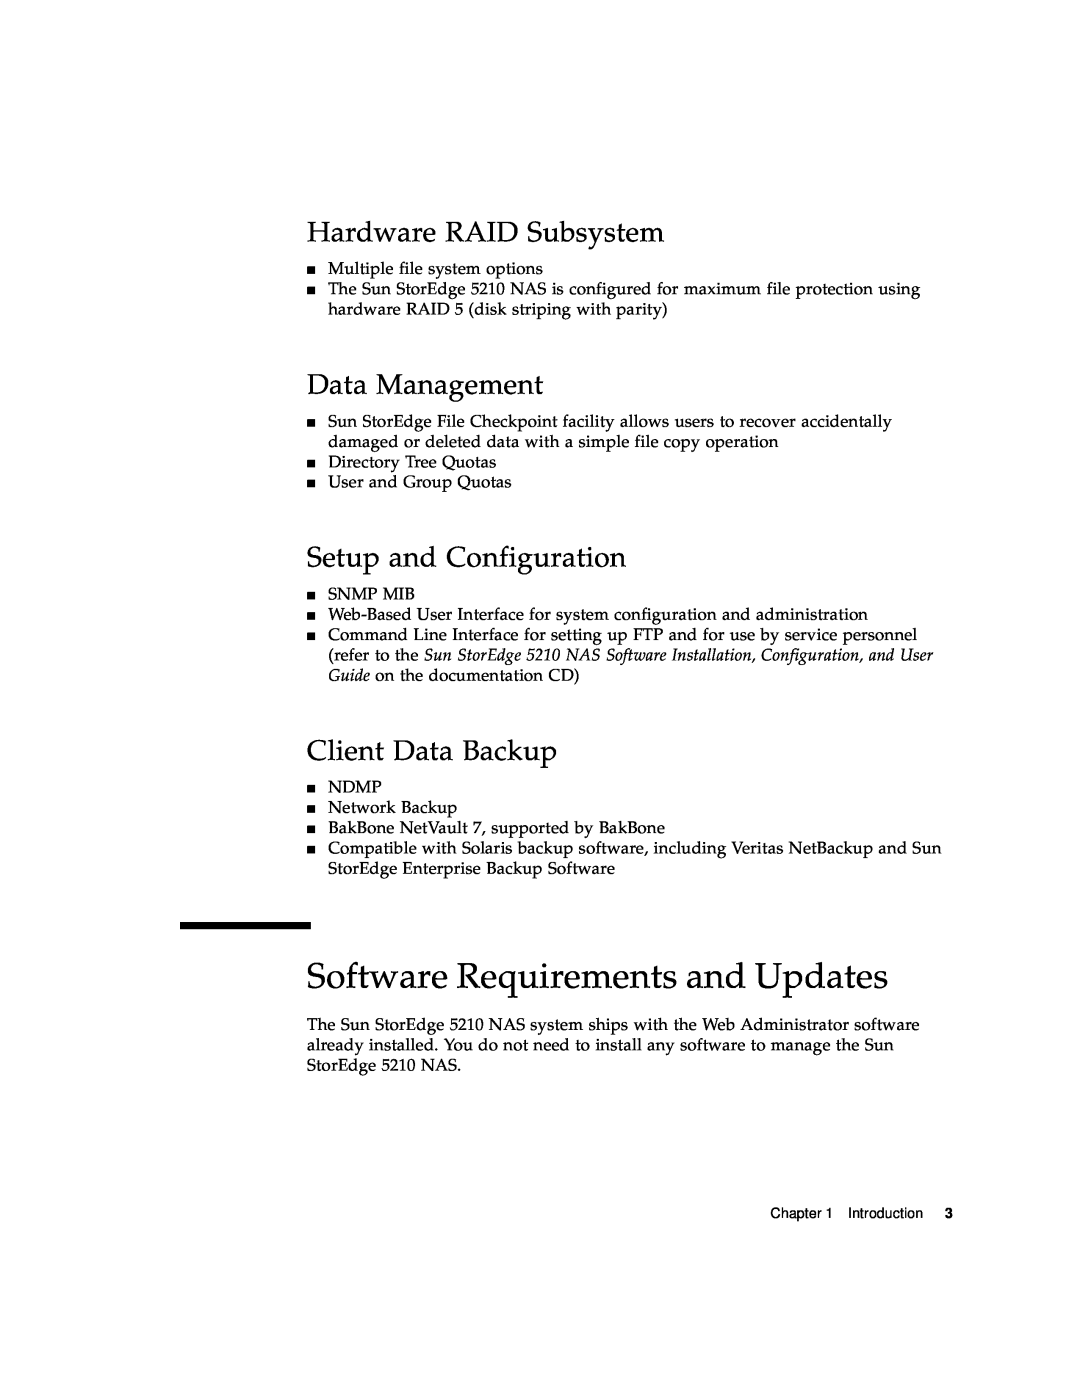 Sun Microsystems 5210 NAS Software Requirements and Updates, Hardware RAID Subsystem, Data Management, Client Data Backup 